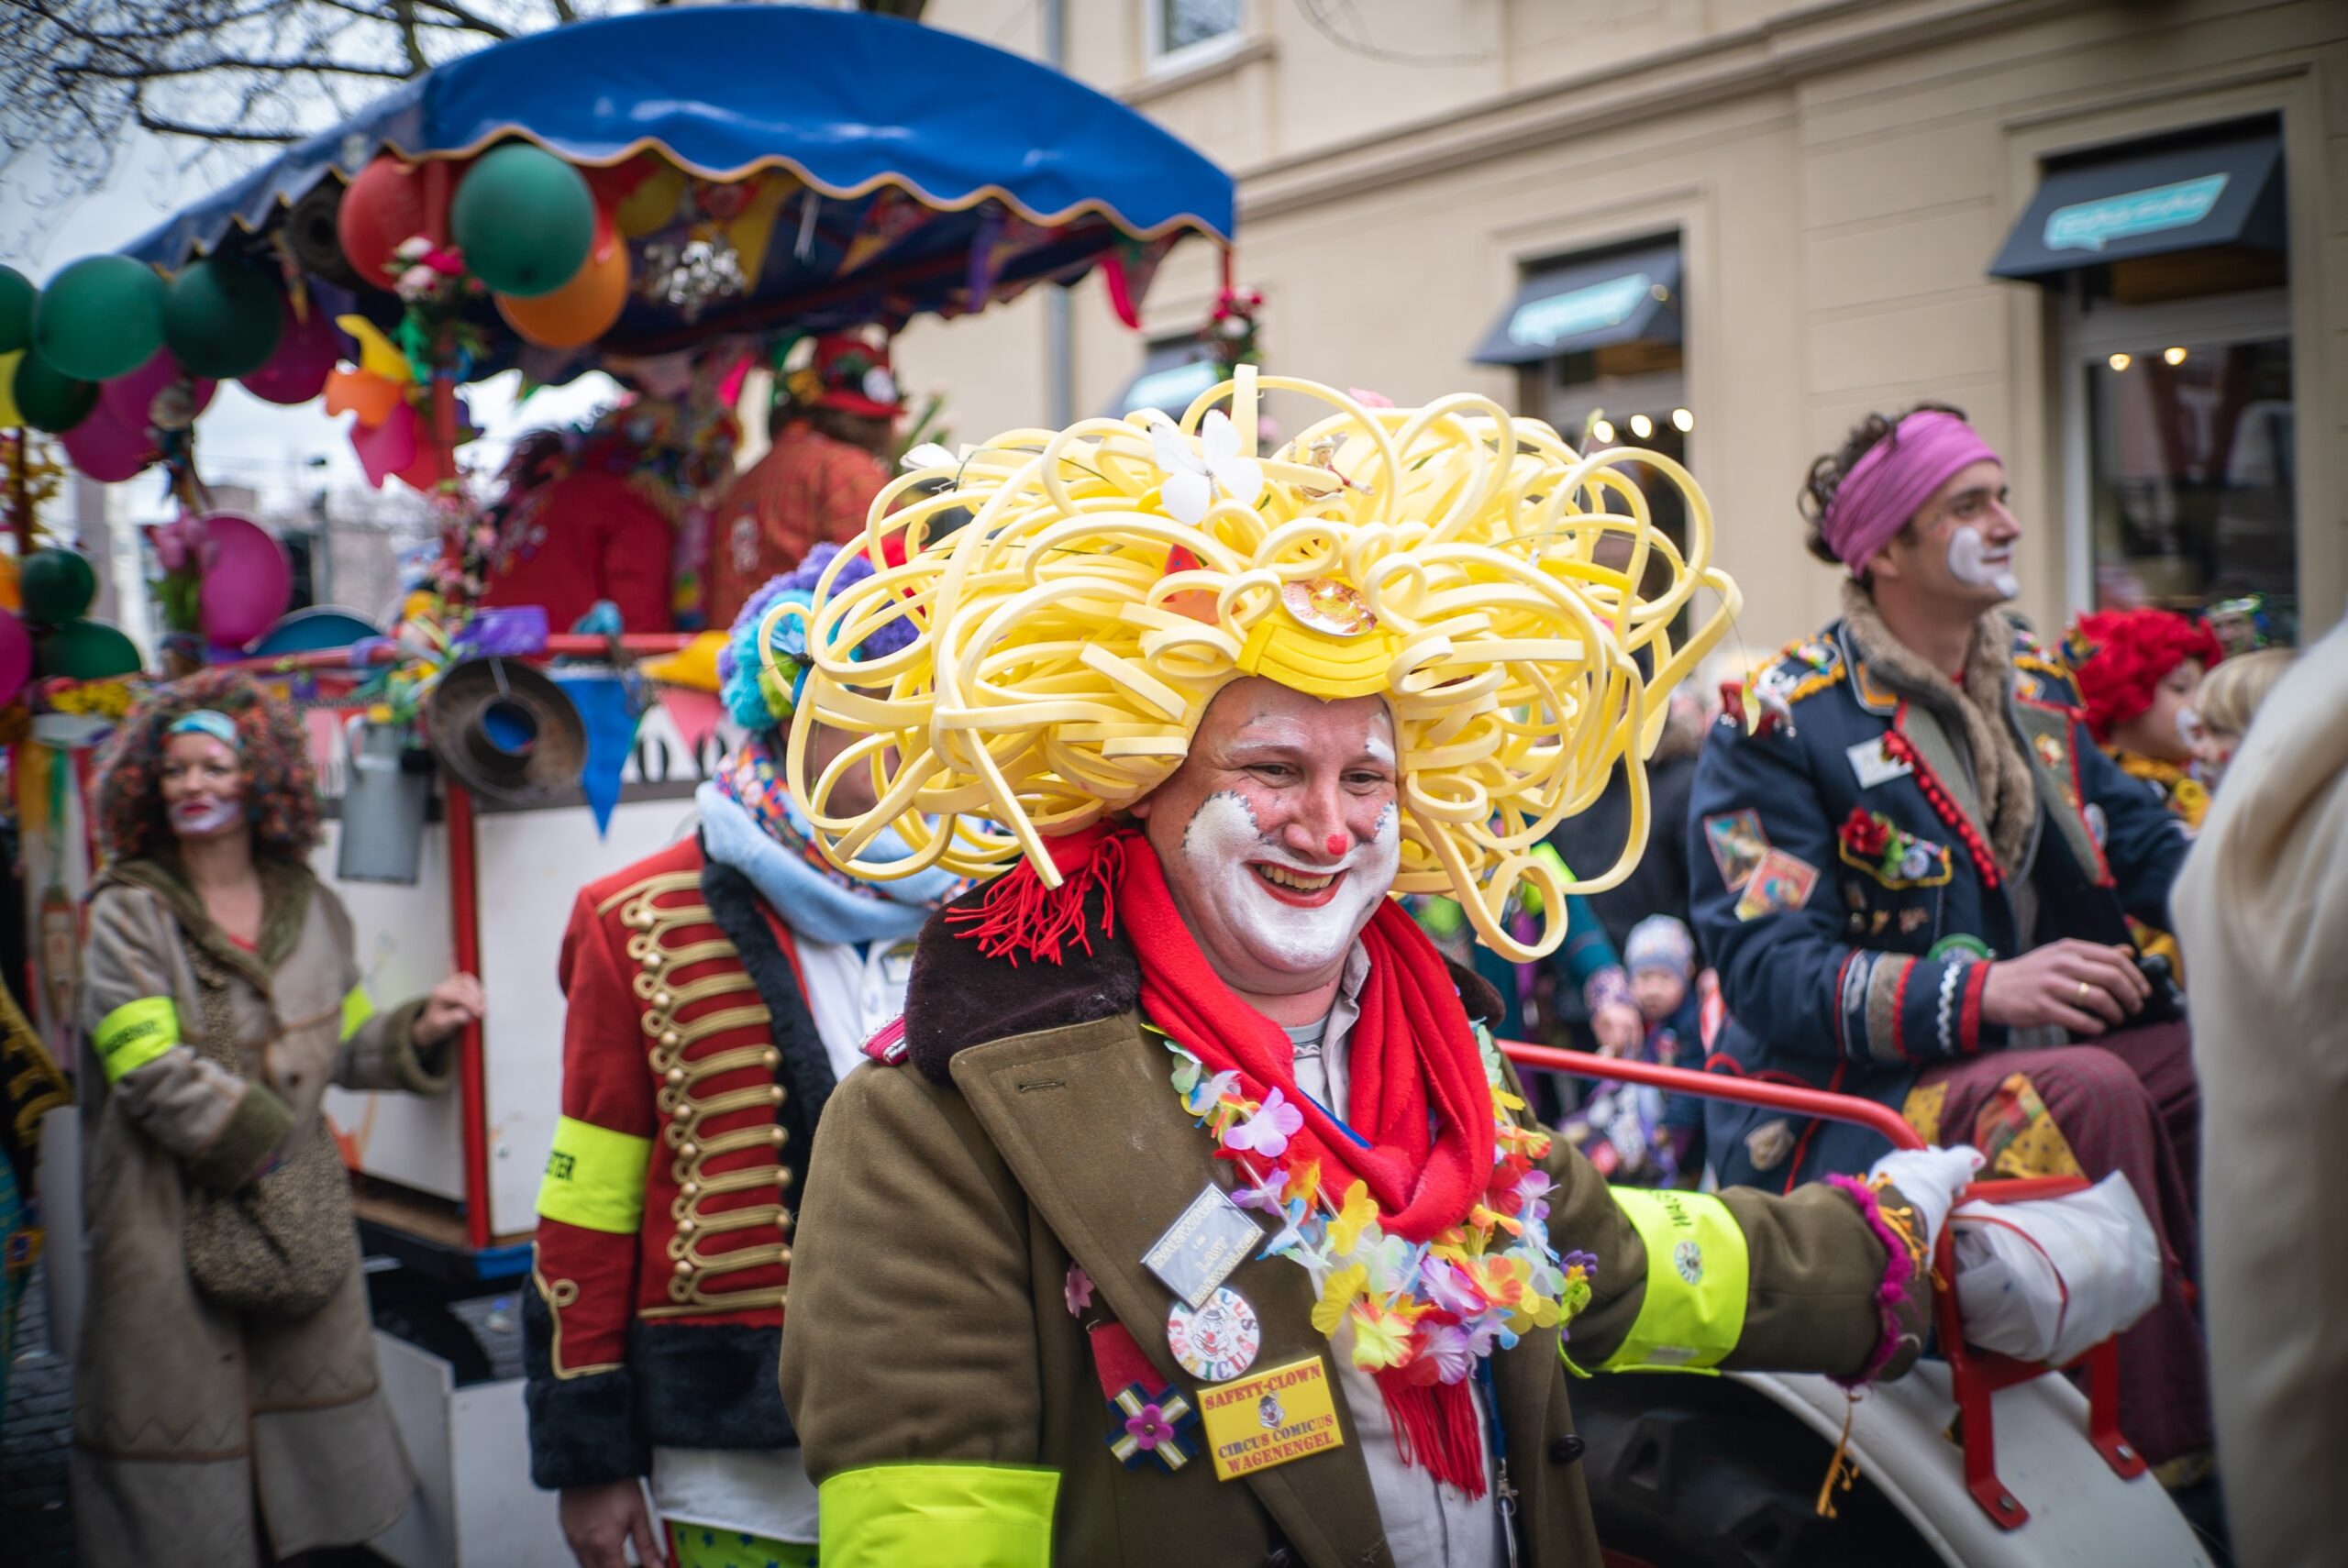 Wear a funny costume and celebrate Karneval in Cologne.